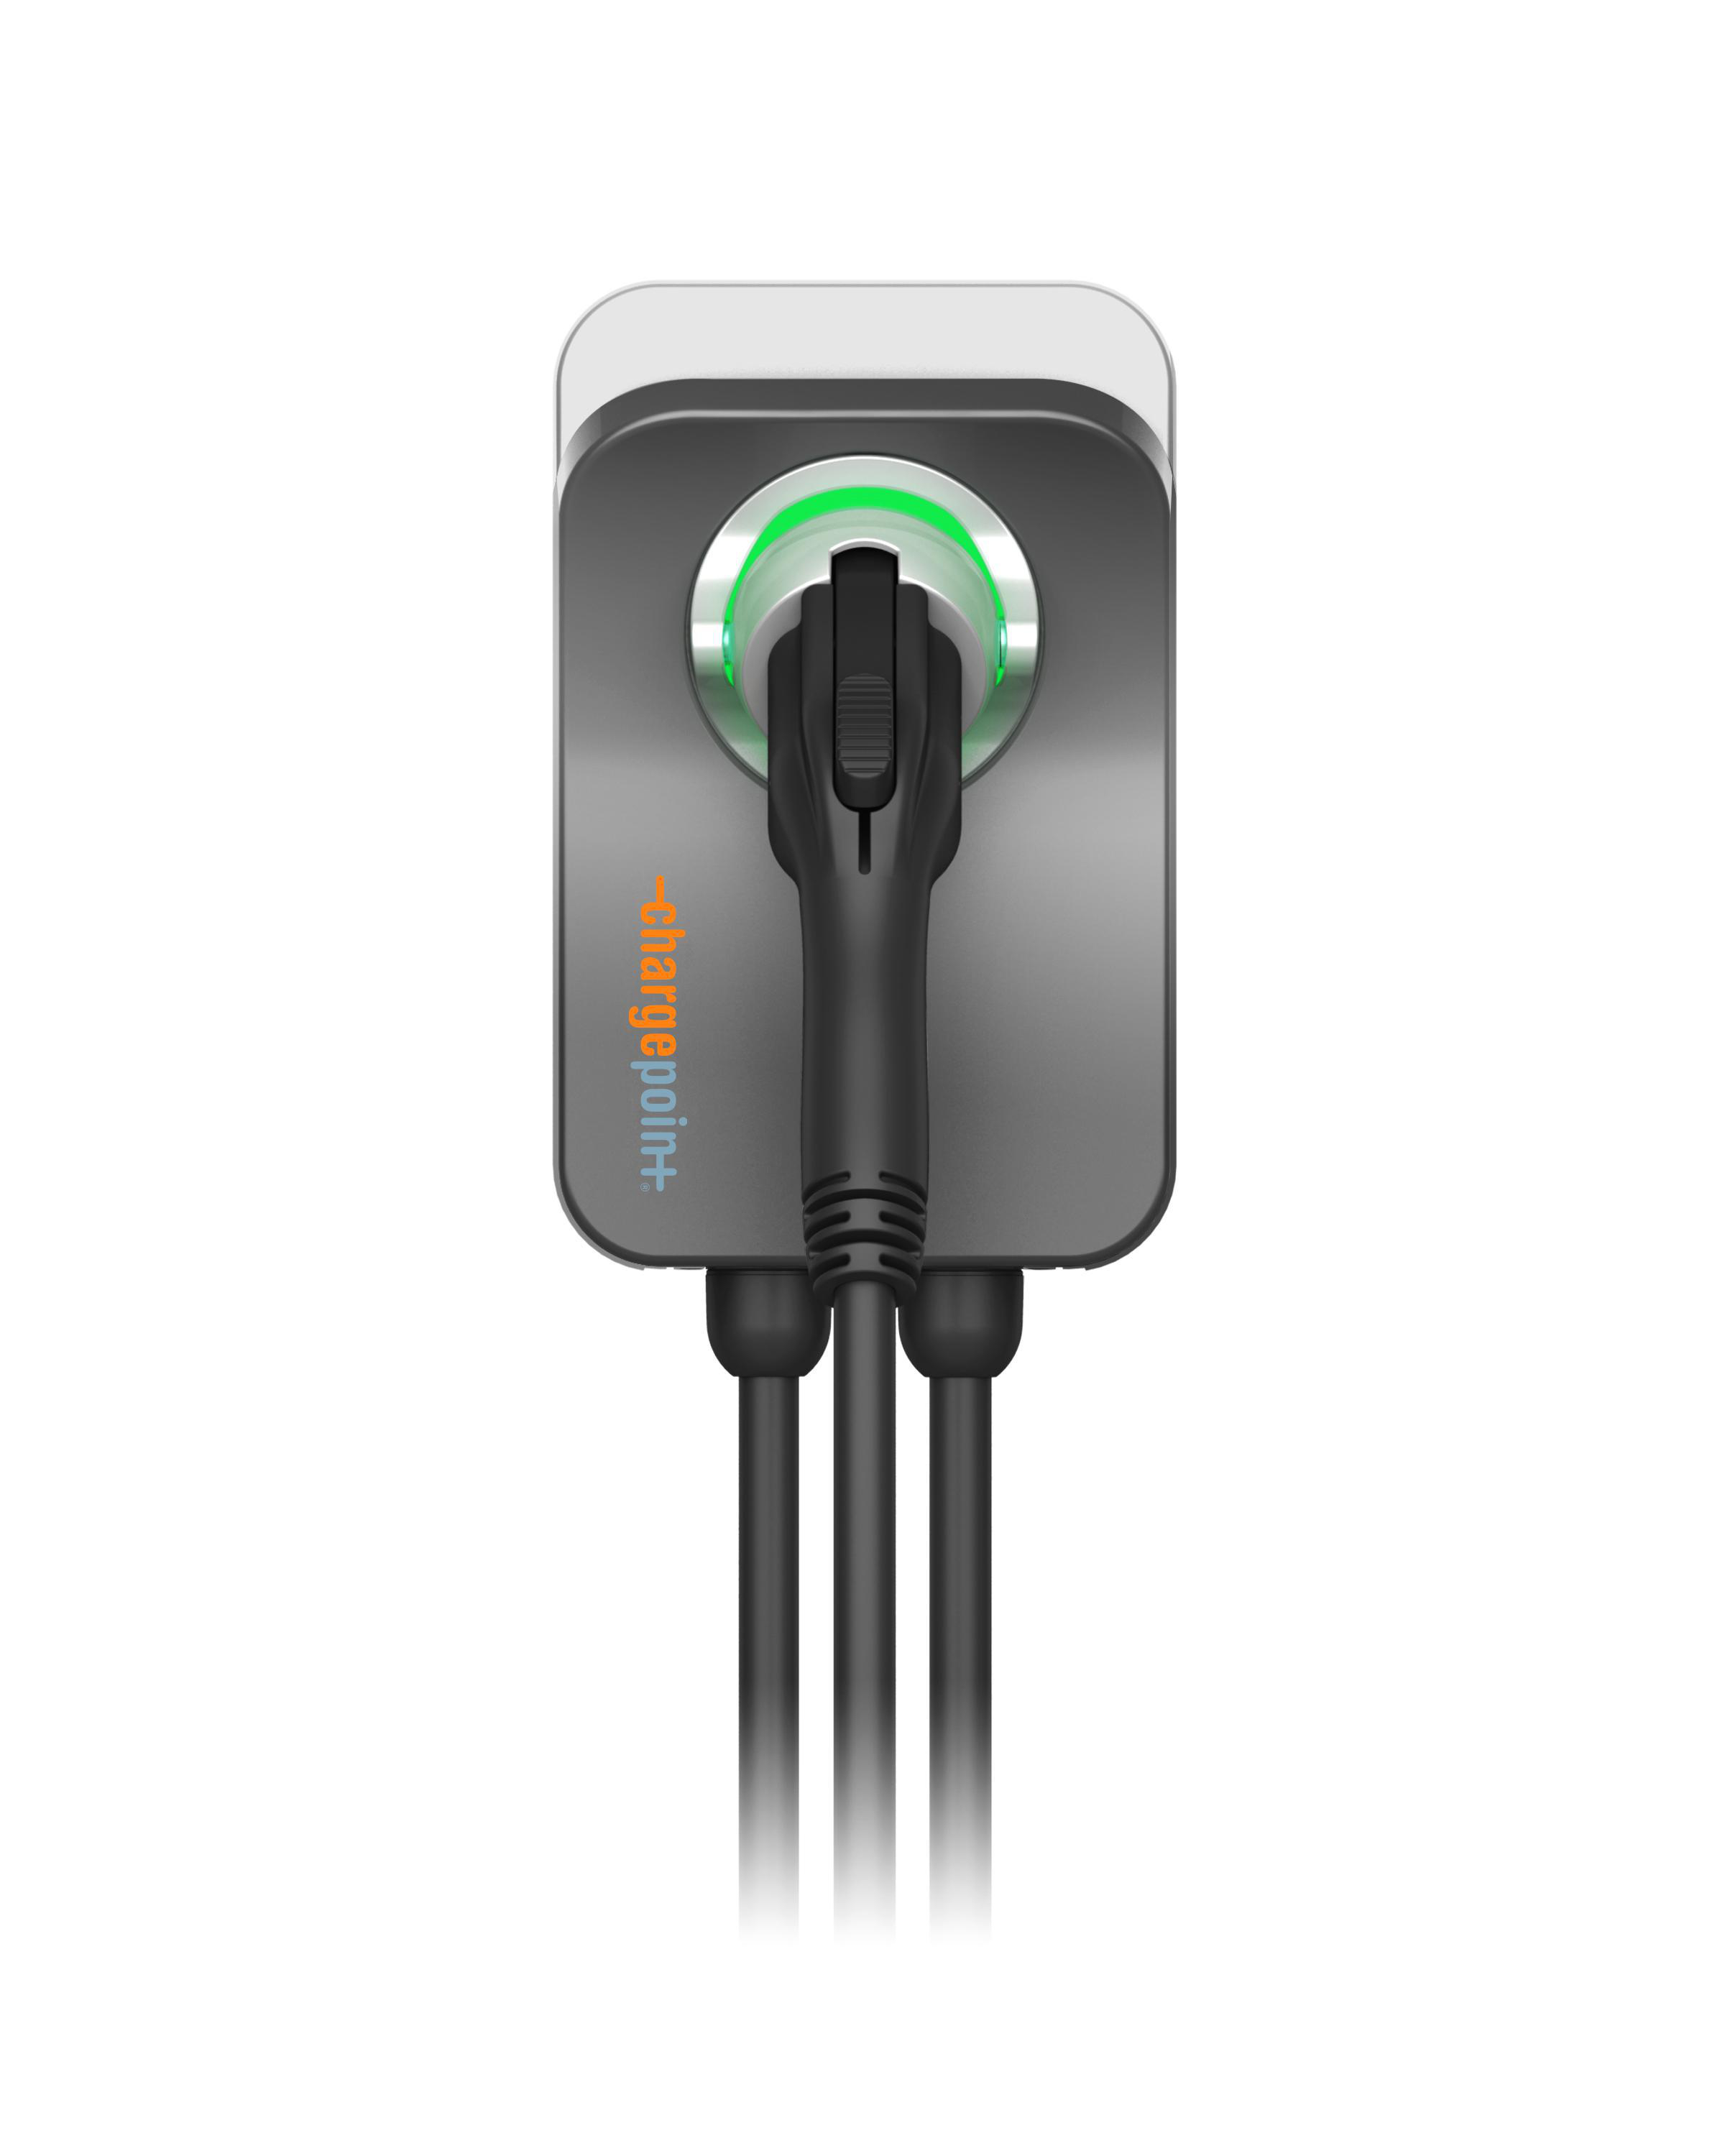 ChargePoint Home Flex Electric Vehicle (EV) Charger Upto 50 Amp, 240V, Level  WiFi Enabled EVSE, UL Listed, Energy Star, NEMA 6-50 Plug Or Hardwired, 